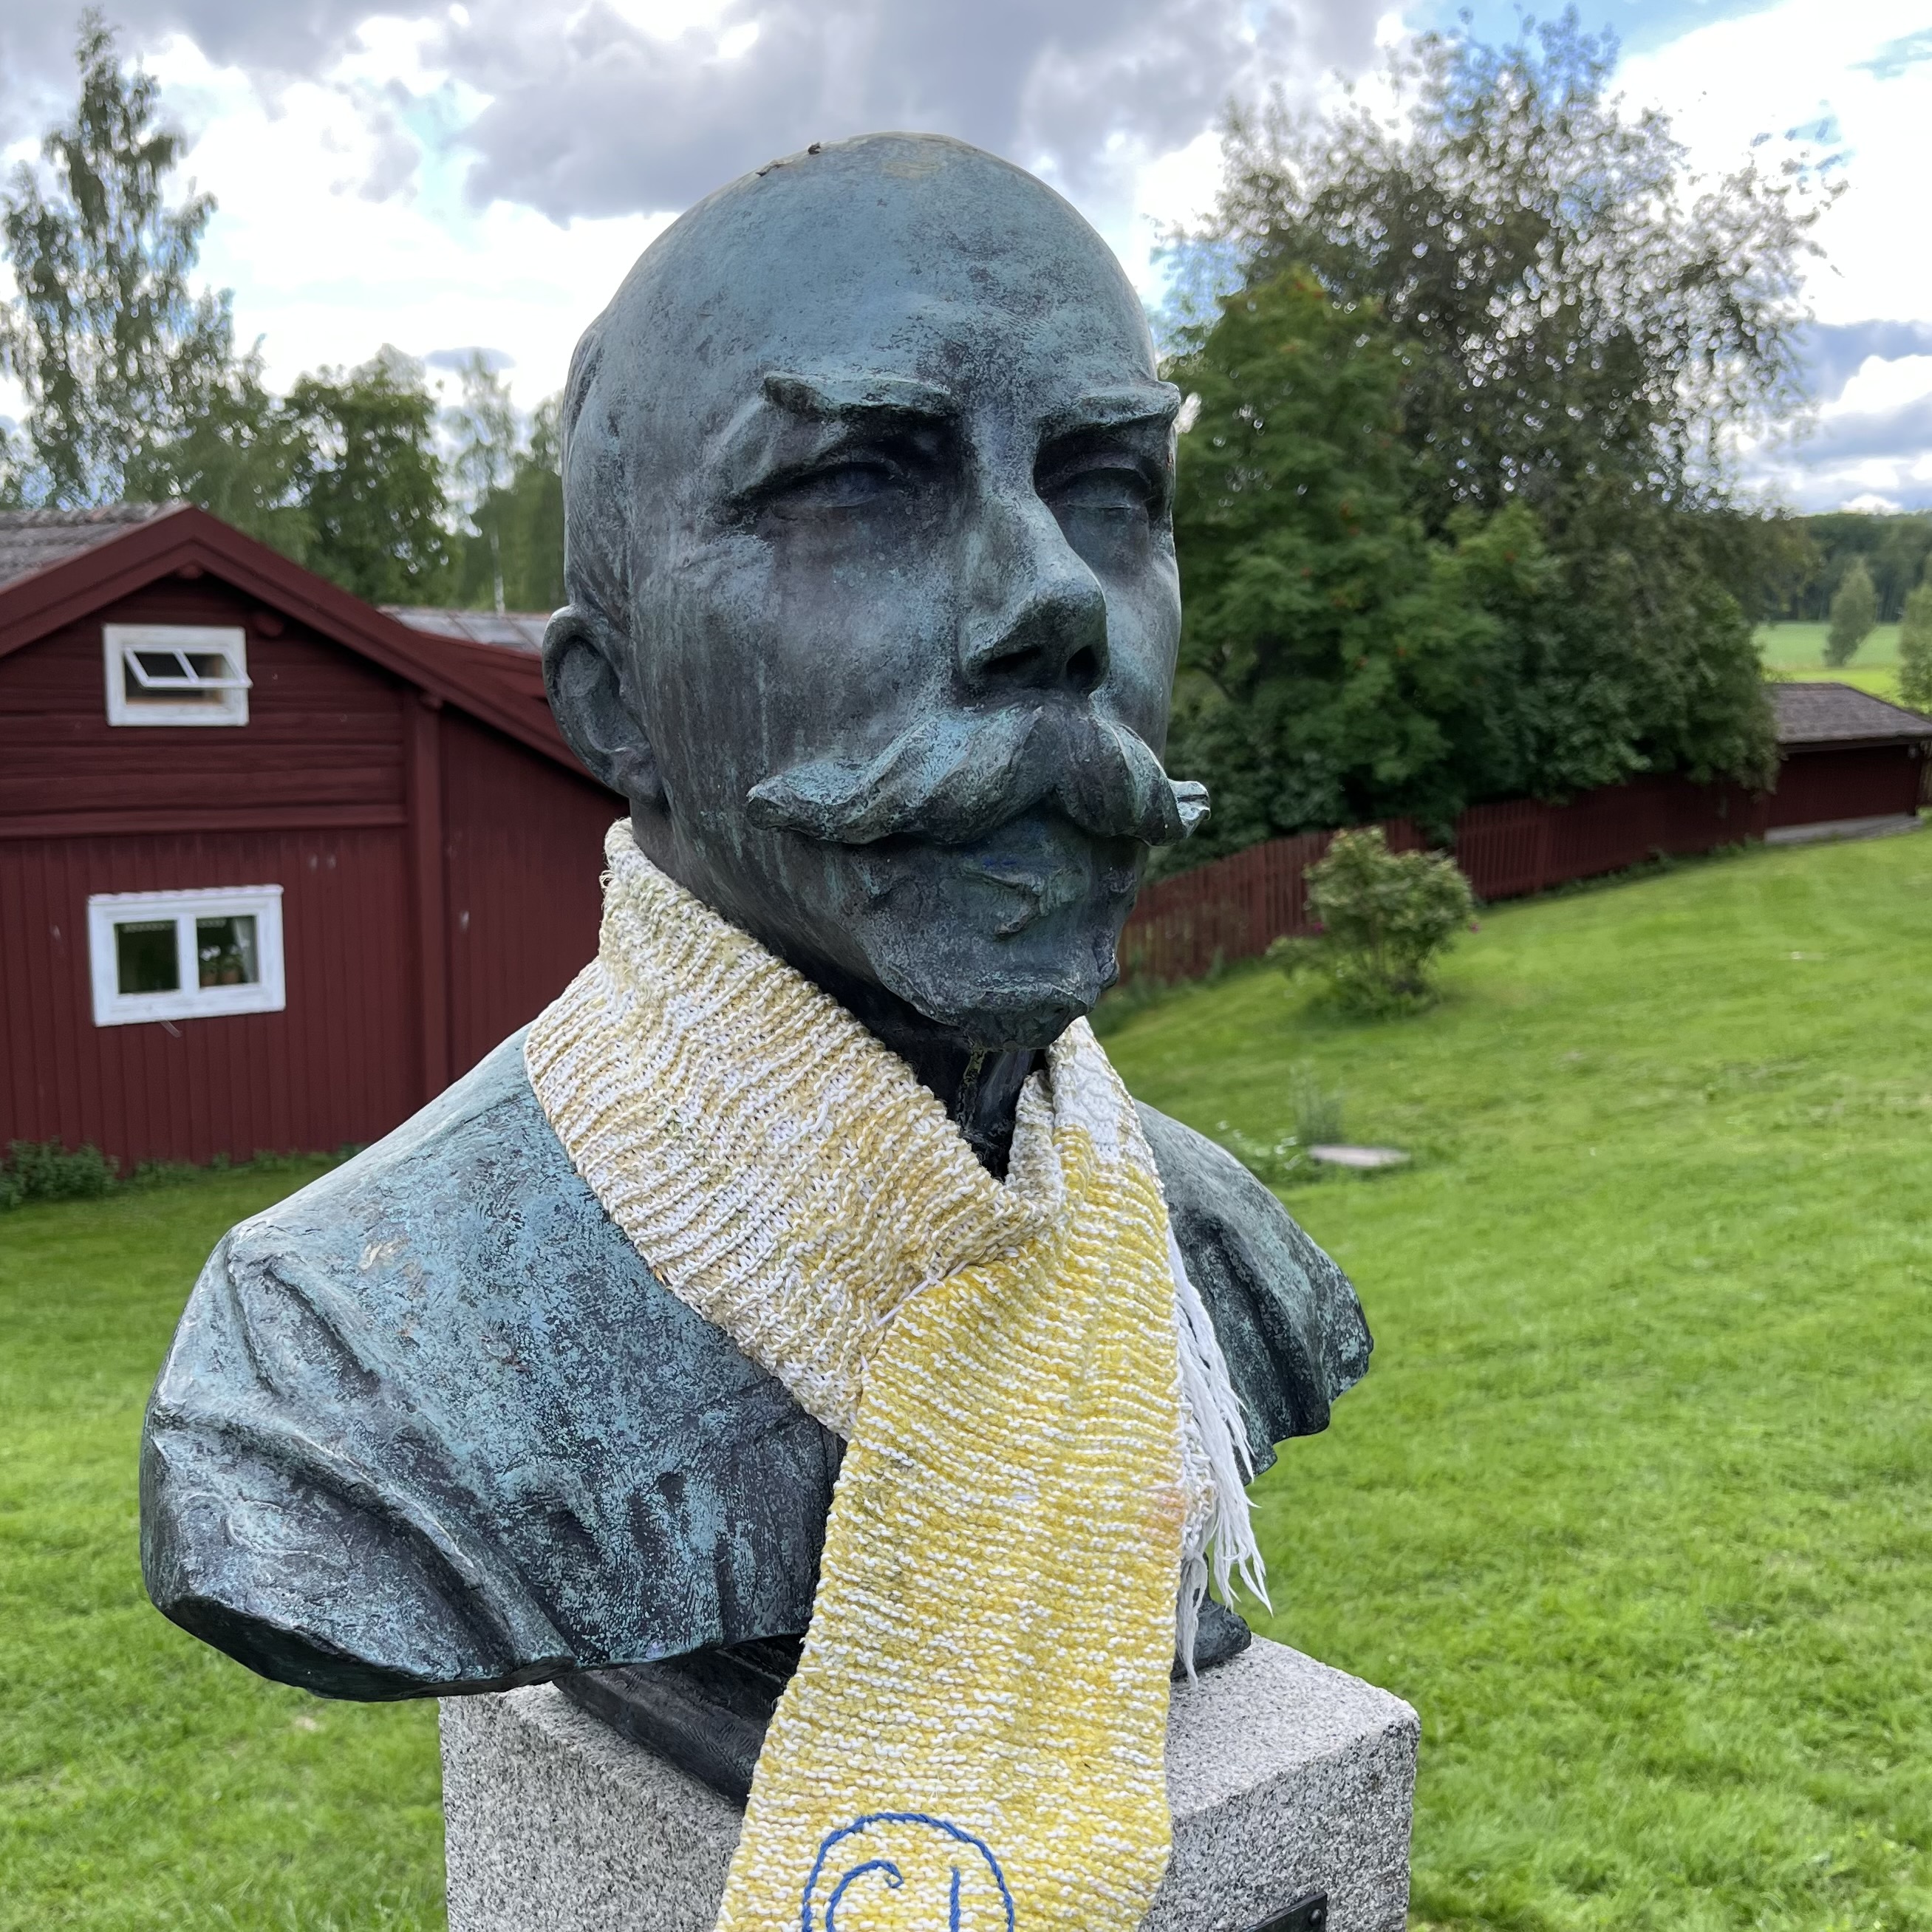 A small statue of Carl Larsson's head